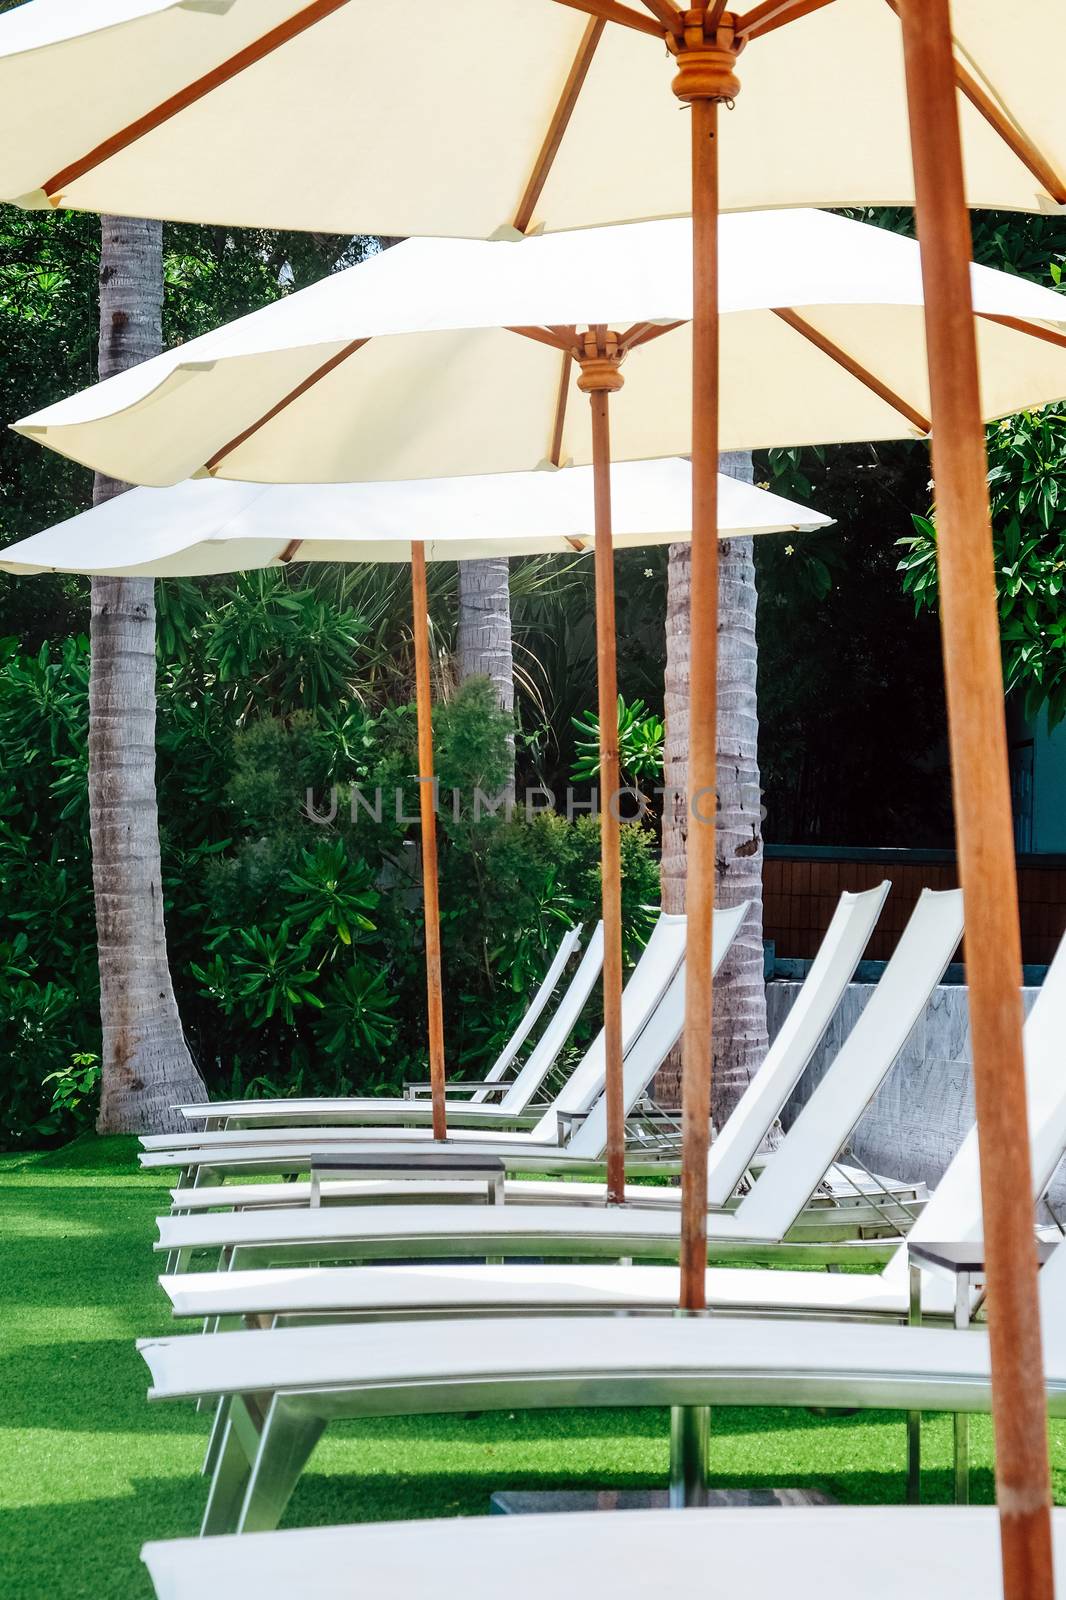 Image of Chaise longue at the pool in tropical resort by ponsulak